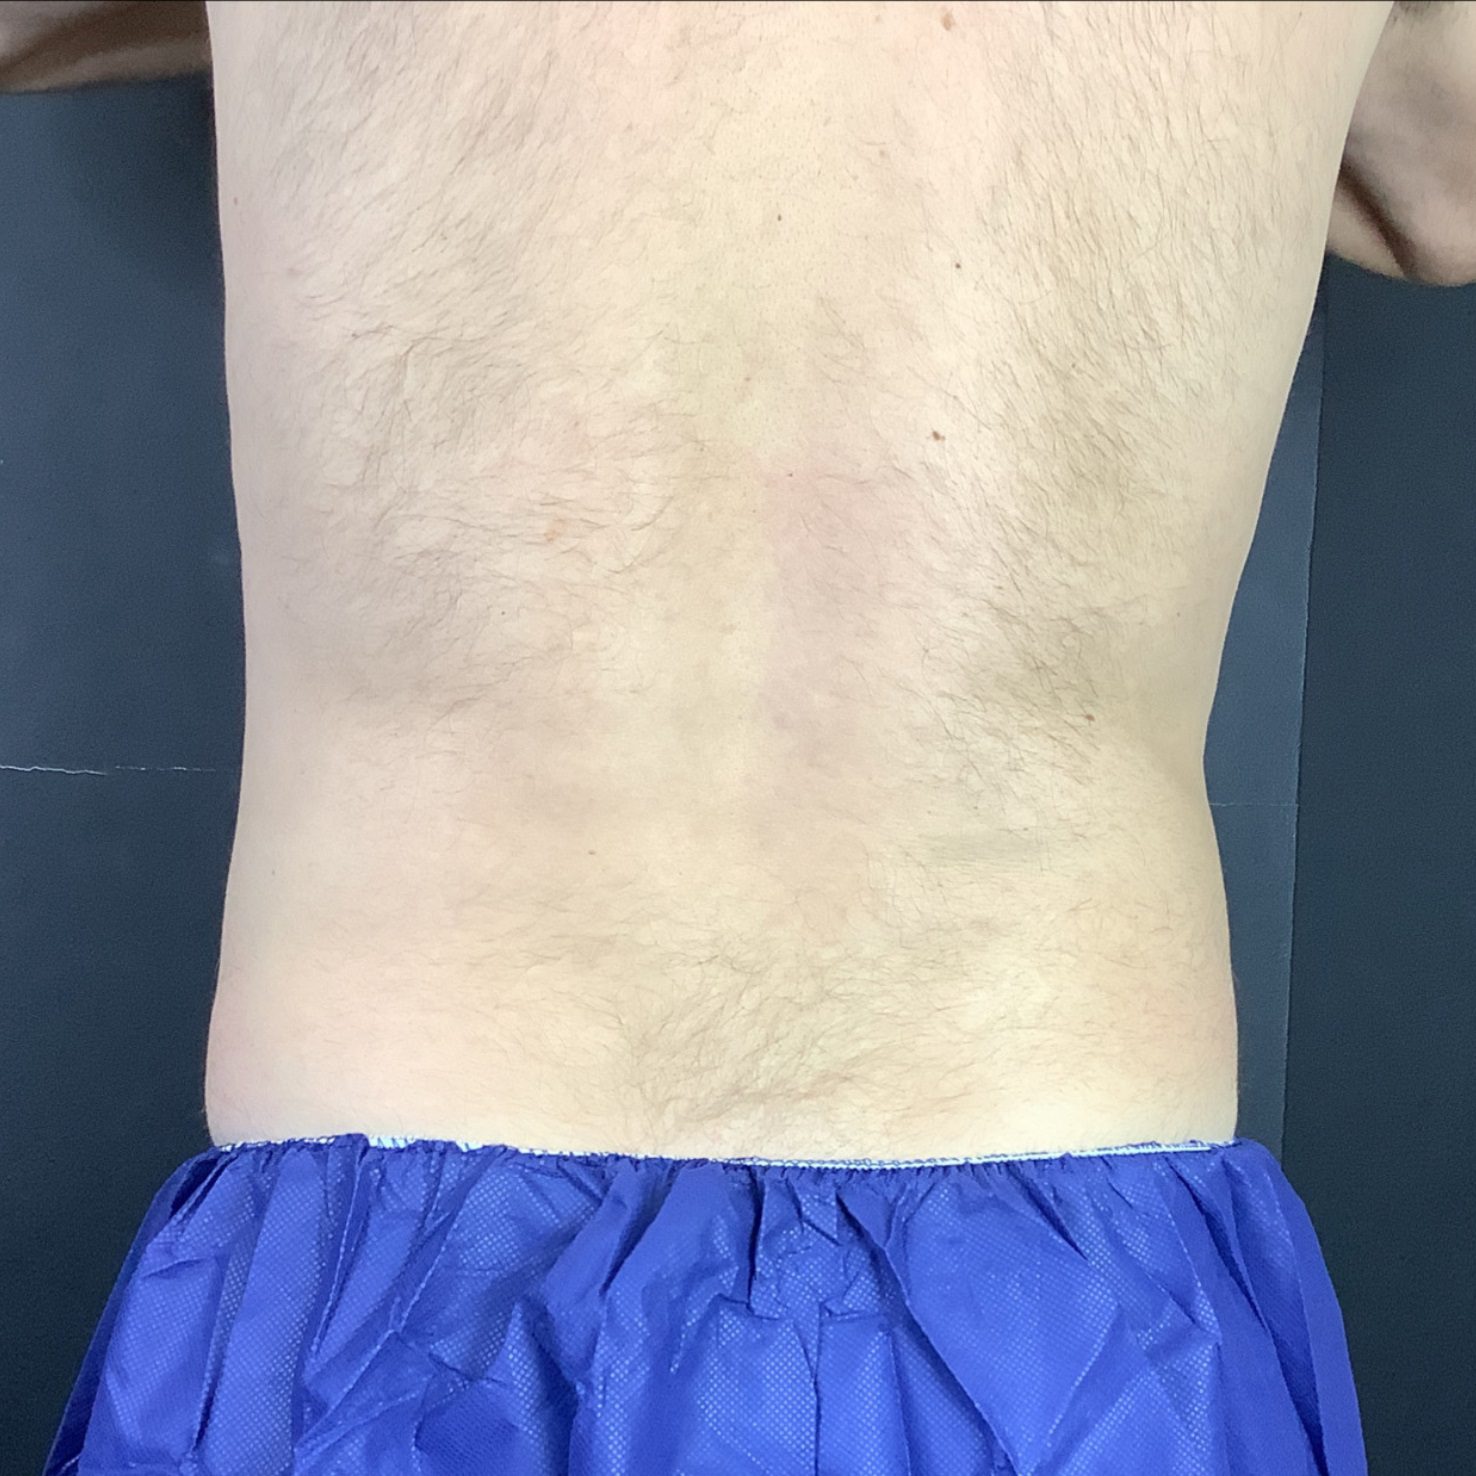 coolsculpting muffin top, flanks after